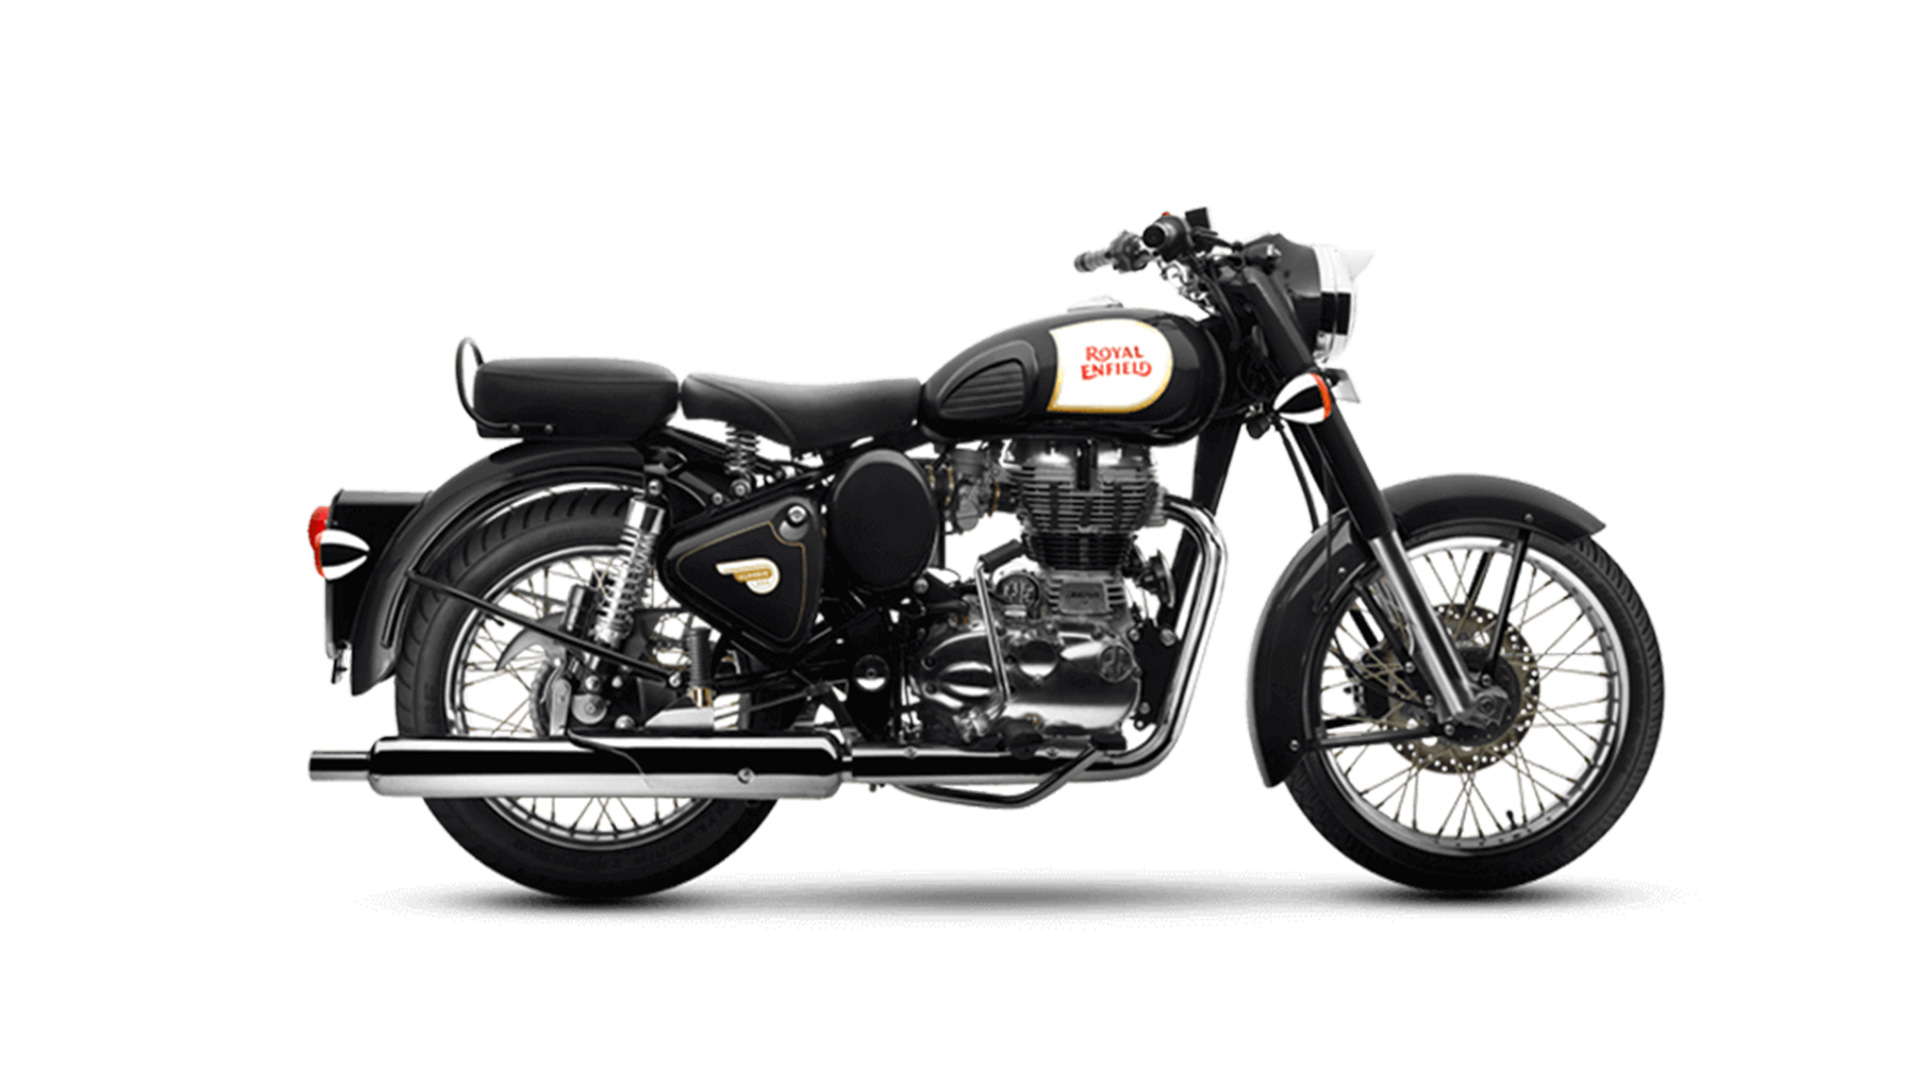 Royal Enfield Classic 350 2019 ABS Bike Photos - Overdrive